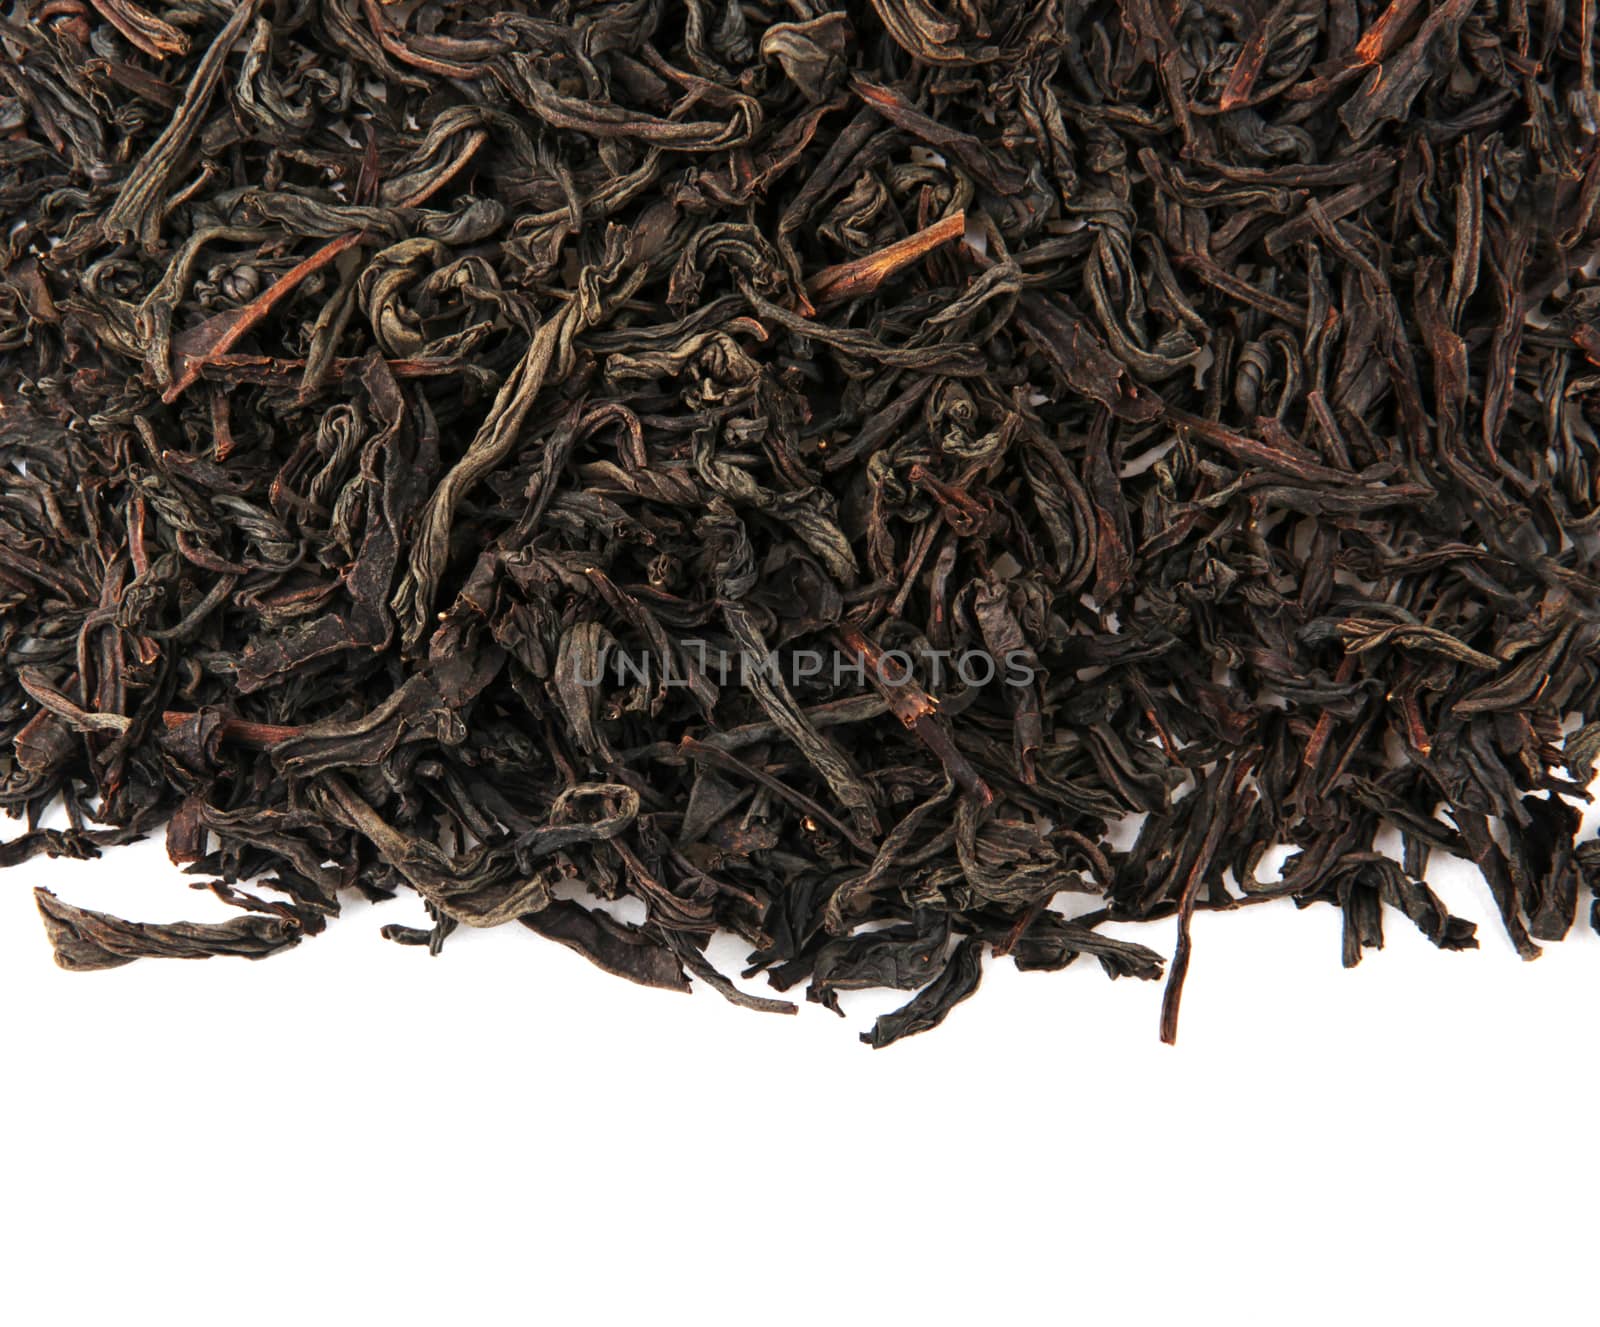 Black Tea Leaves Isolated On White Background by nenovbrothers